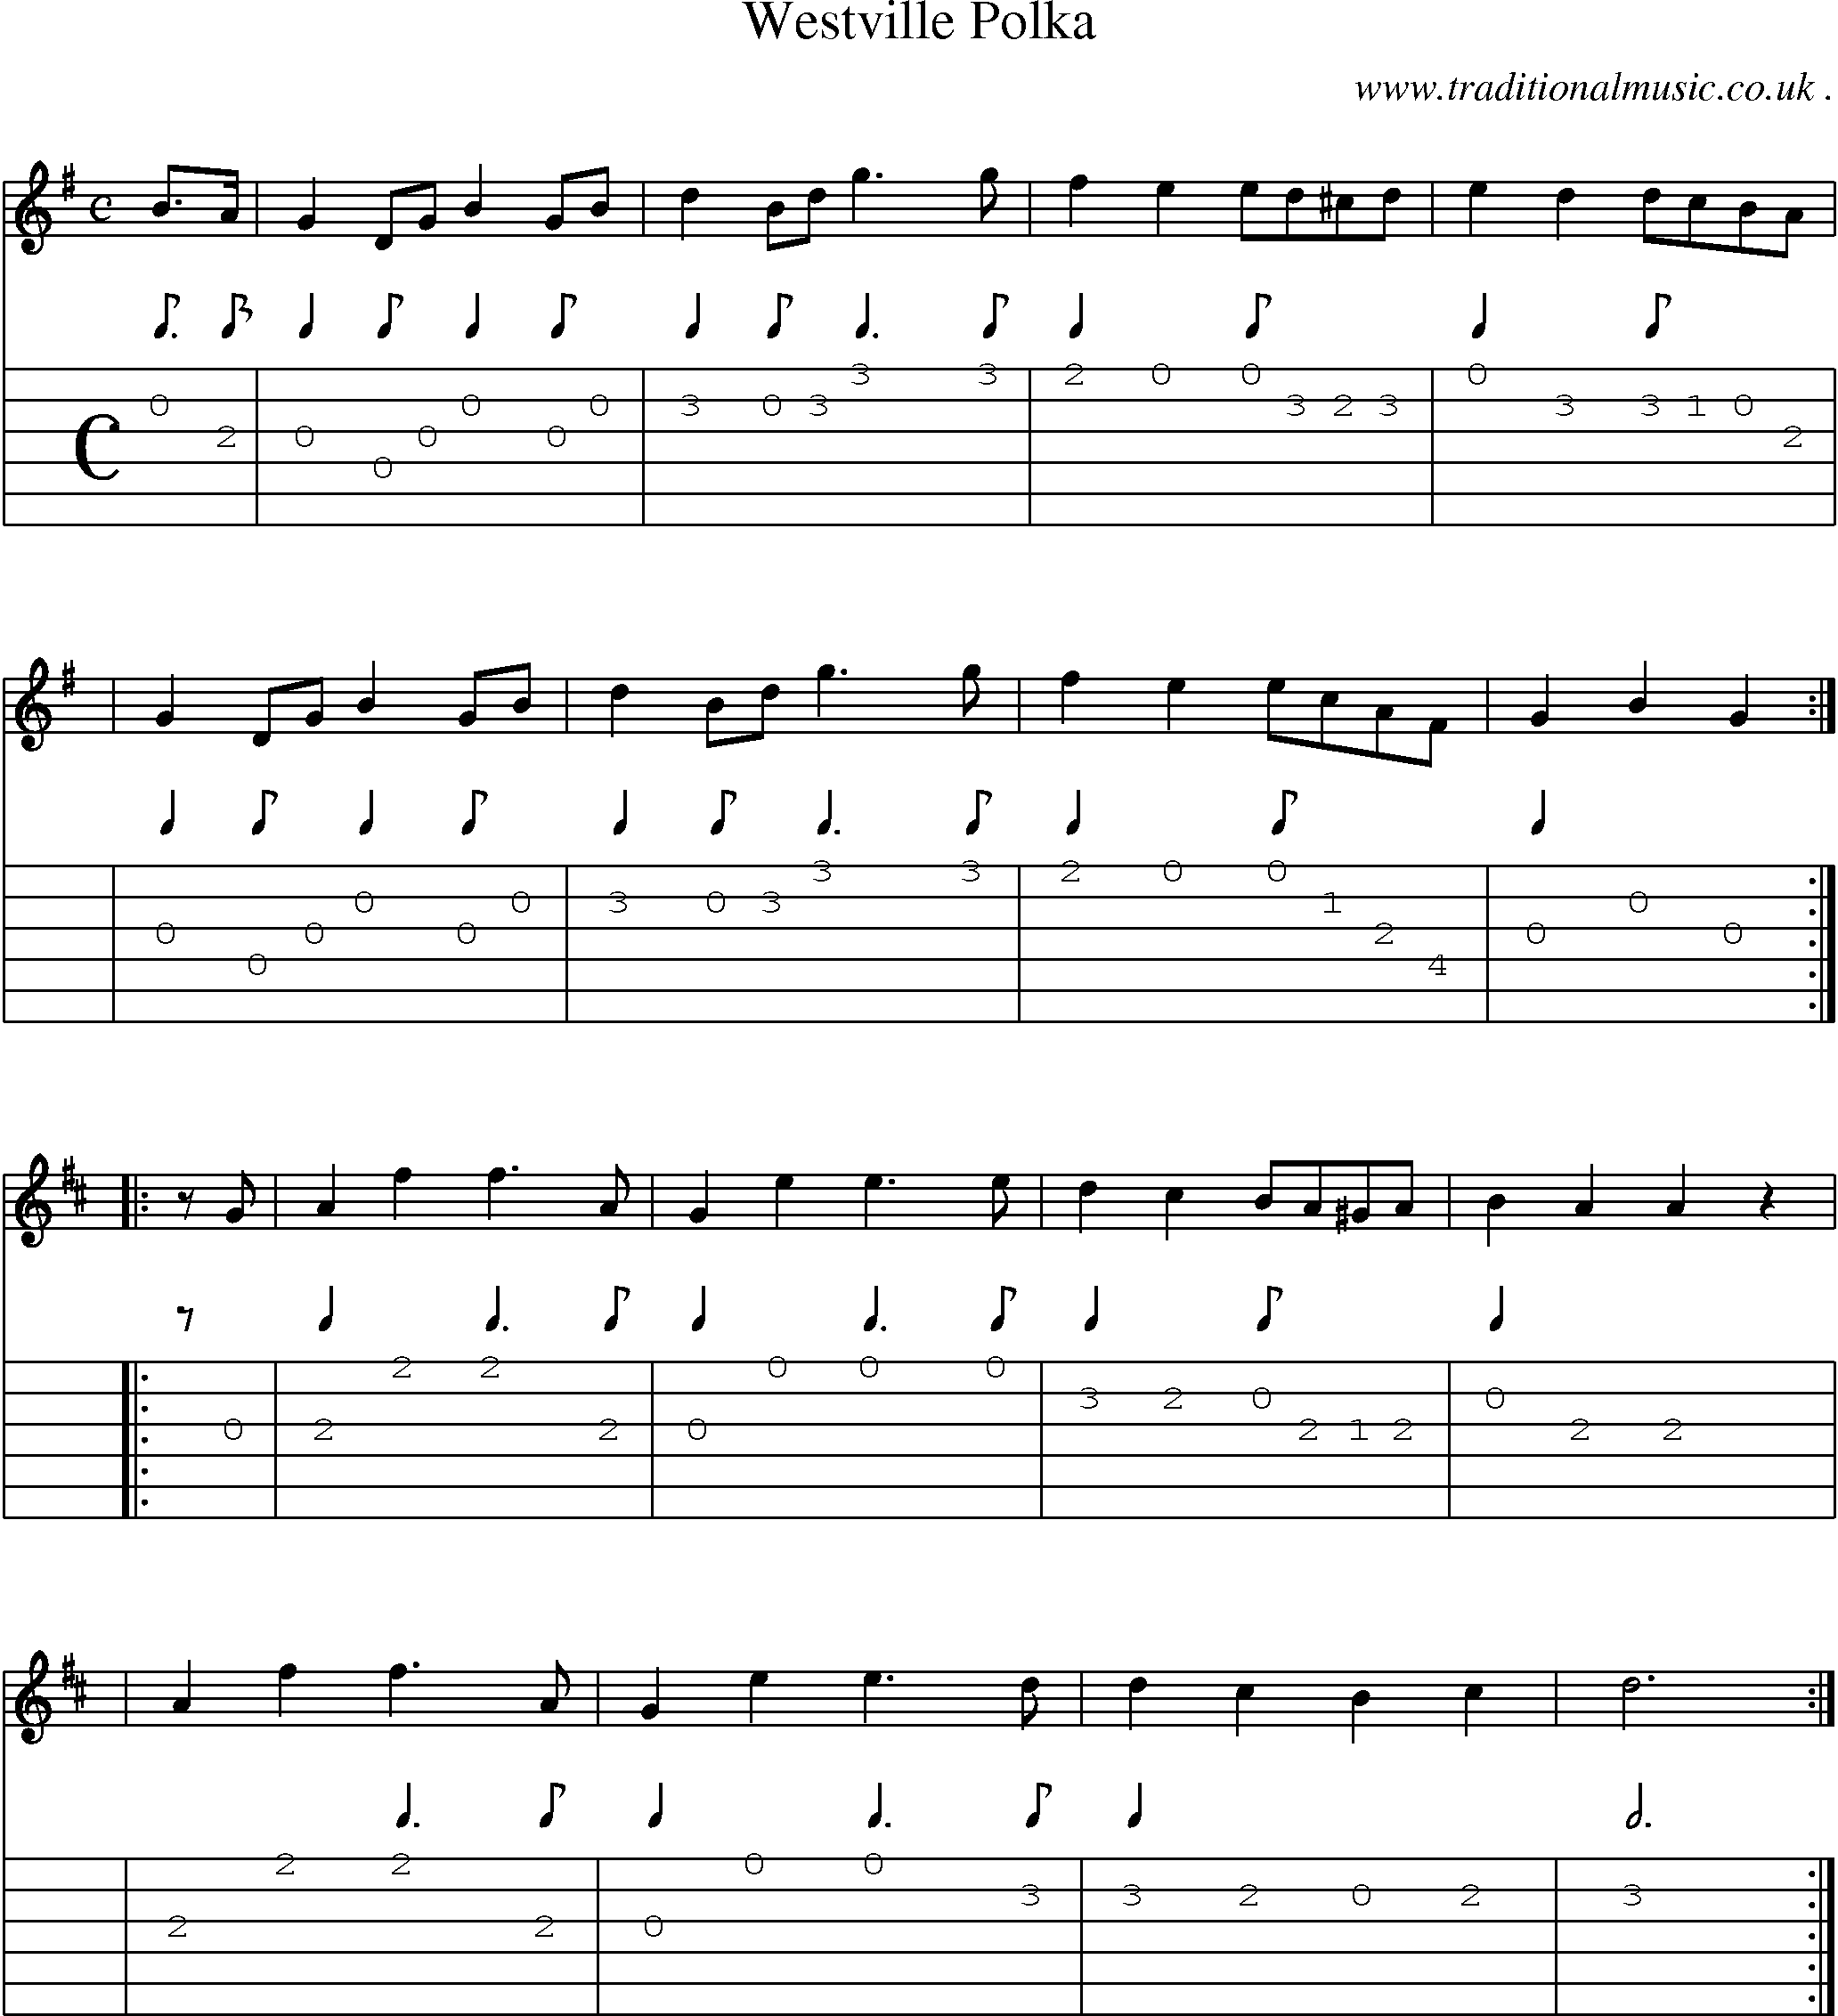 Music Score and Guitar Tabs for Westville Polka